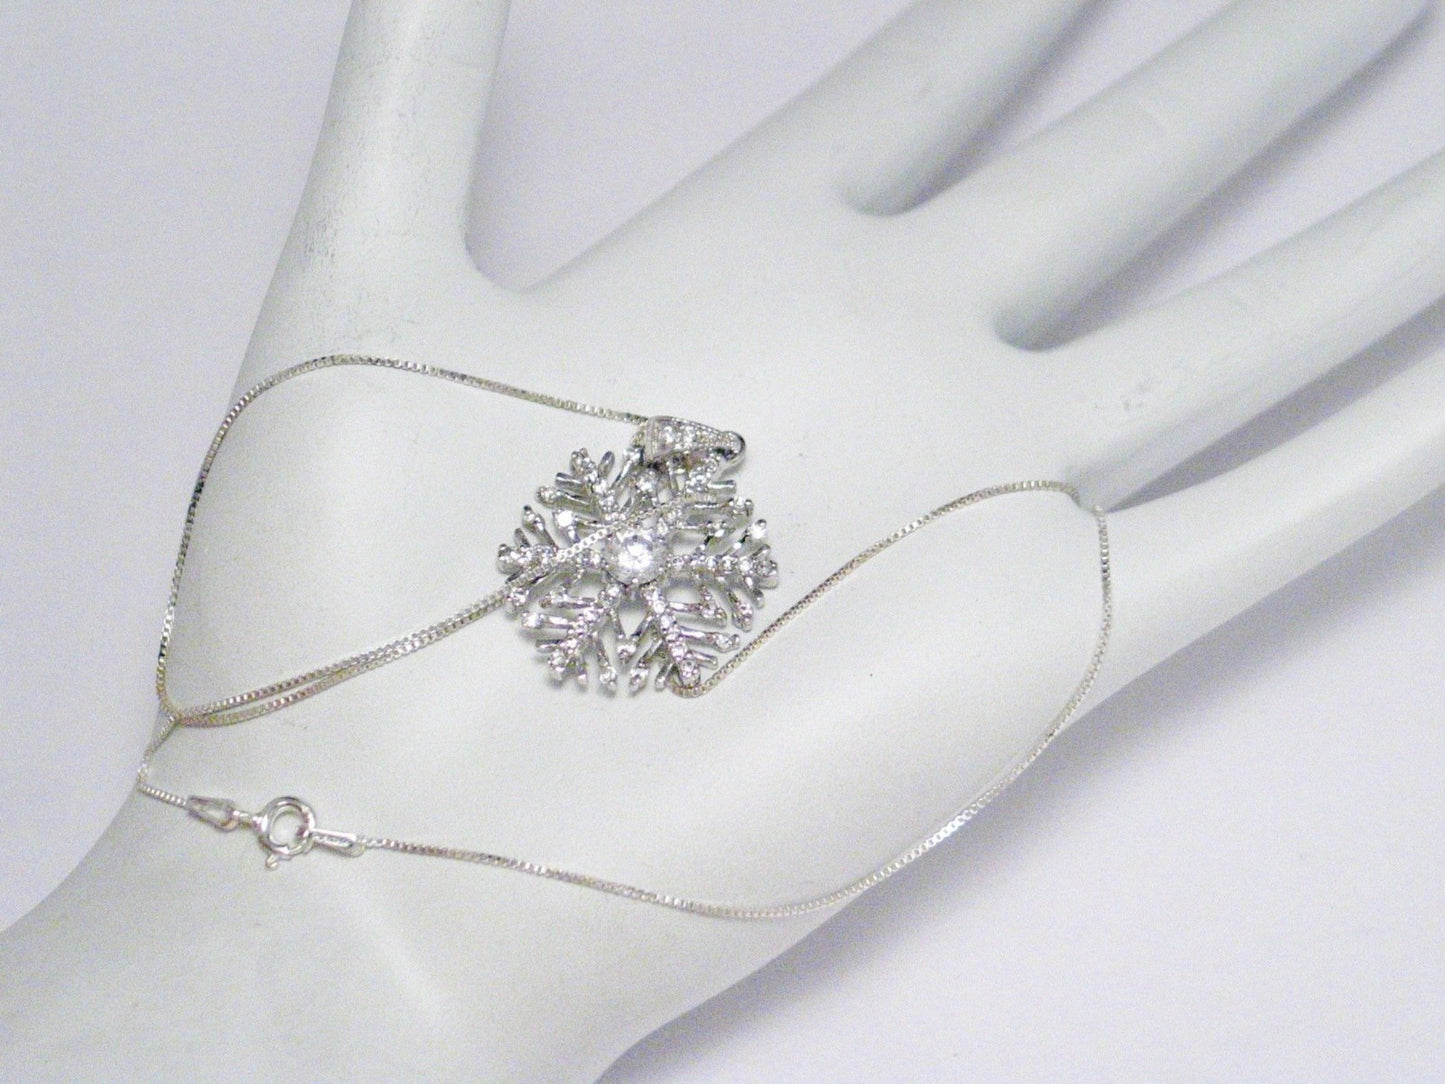 Chain | Womens Sterling Silver Sparkly Cz Snowflake Pendant Necklace 18" | Necklaces